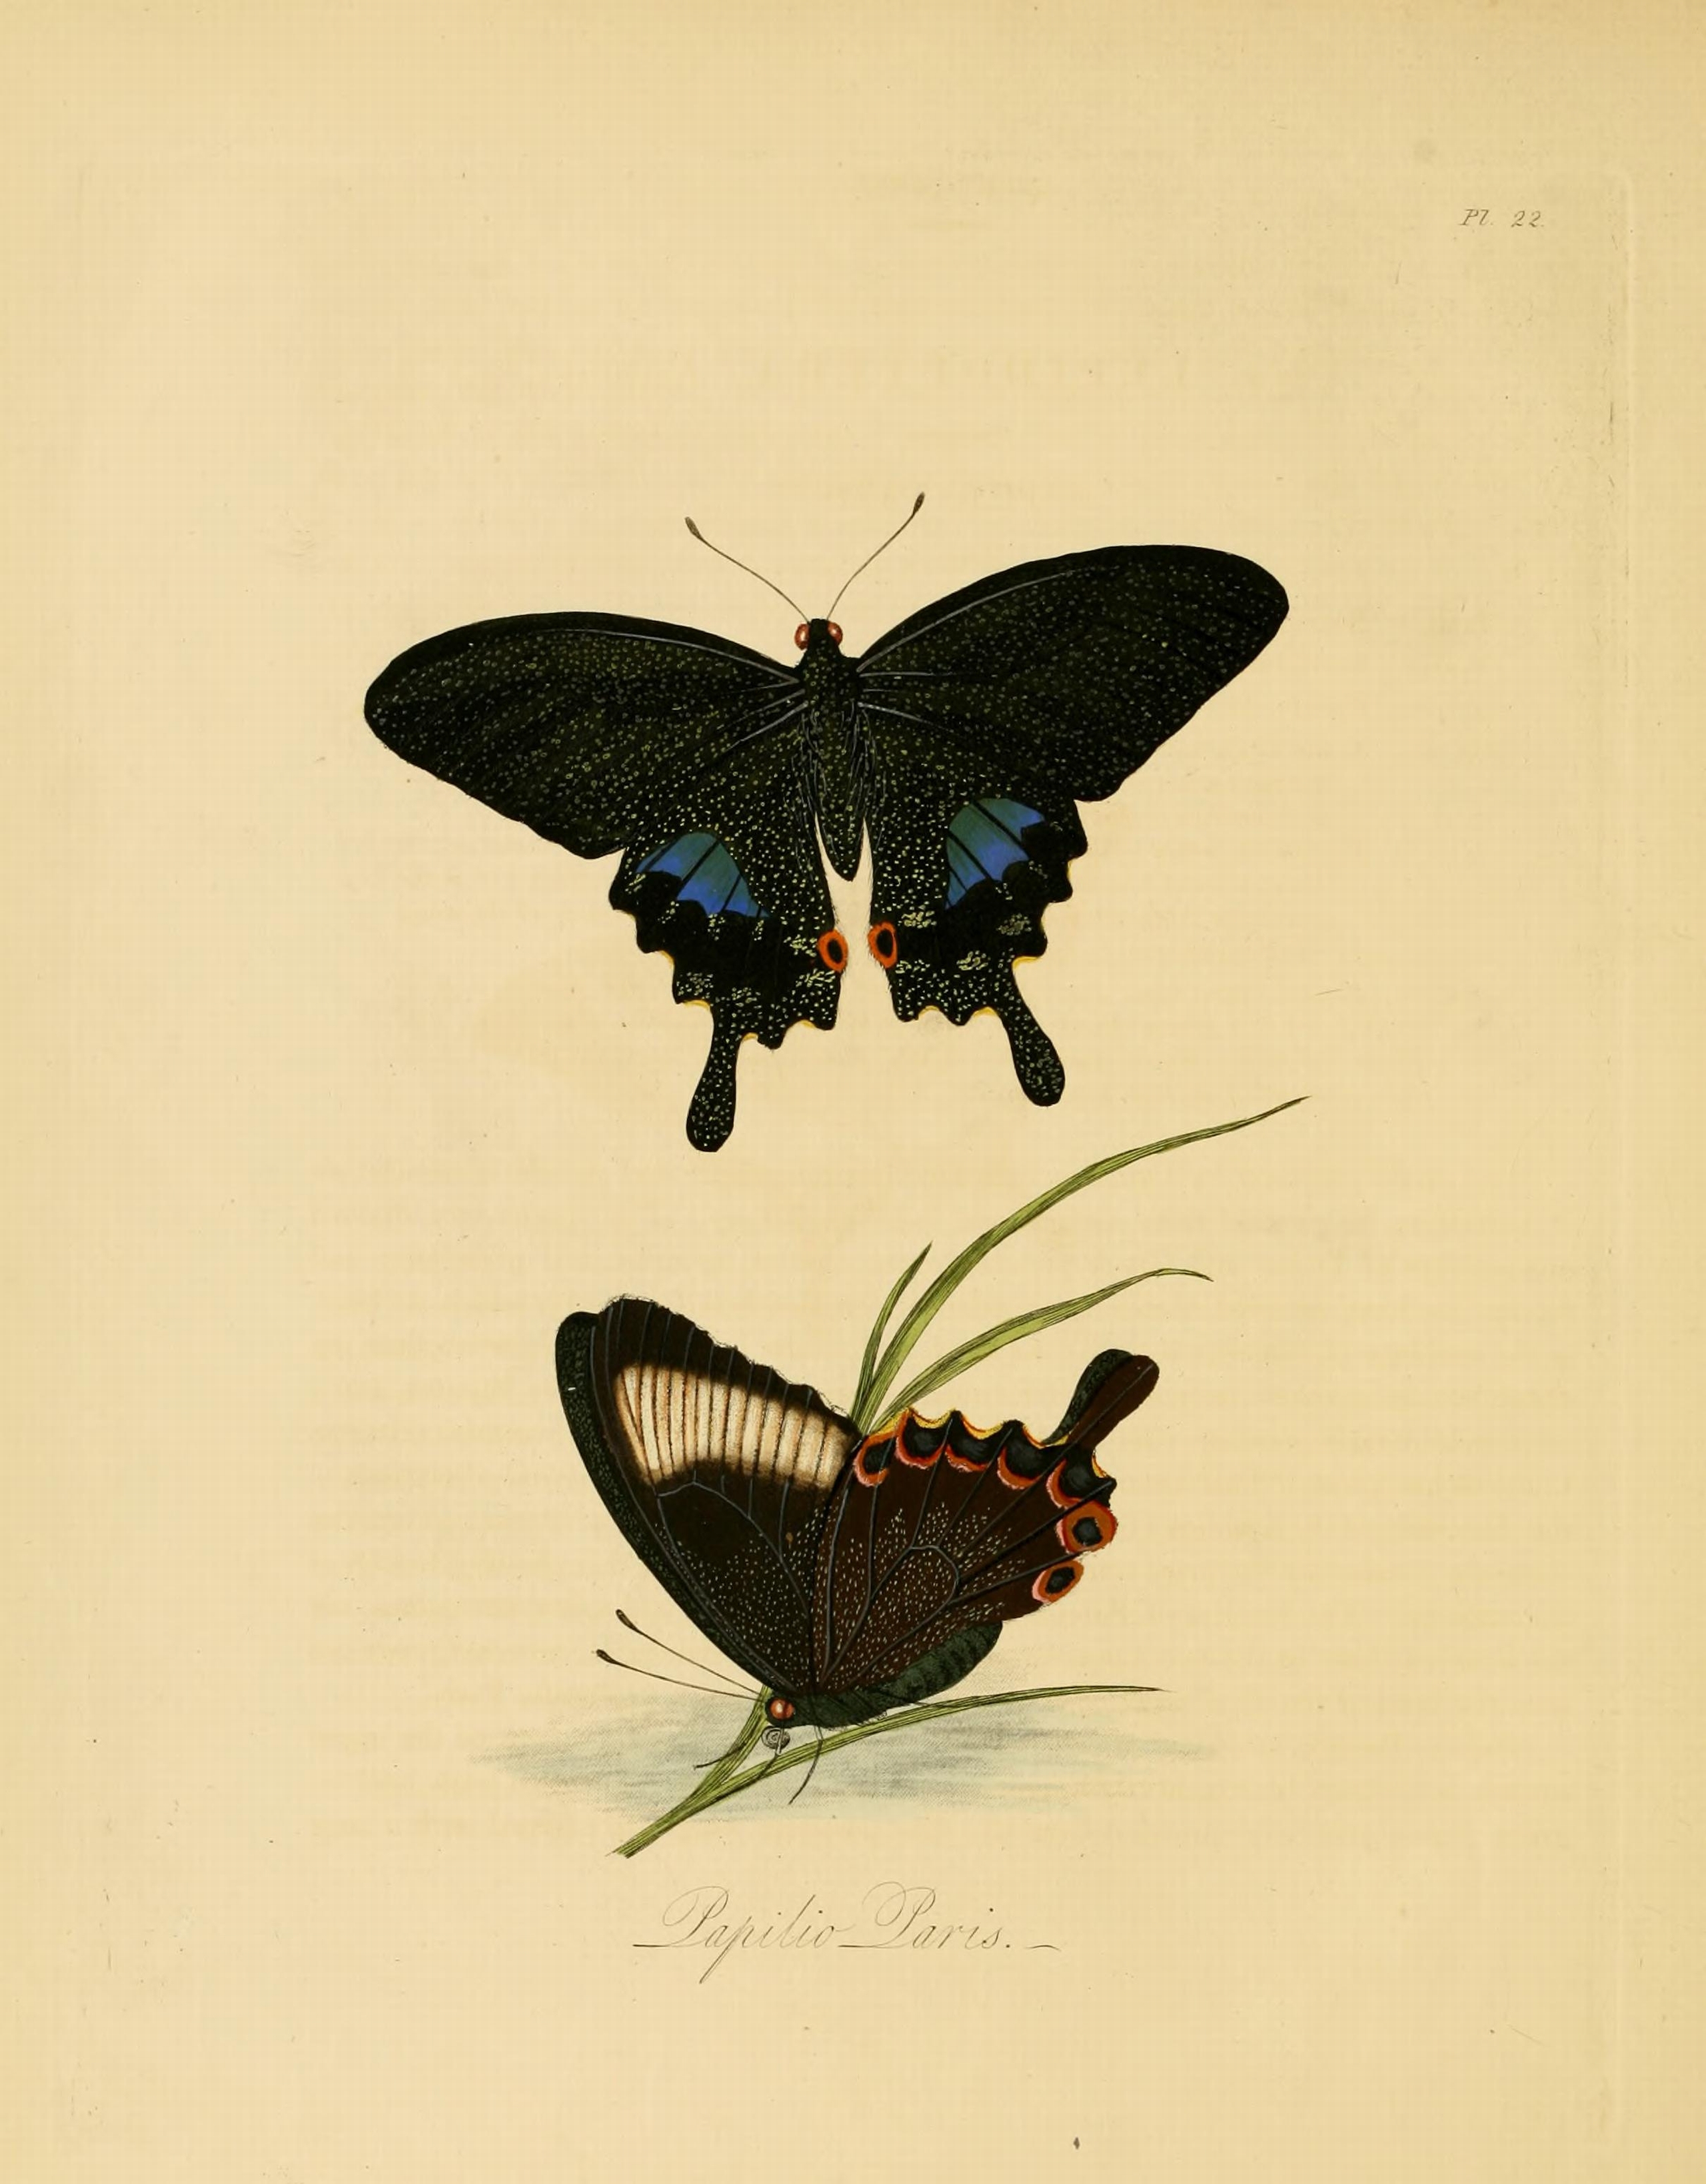 Donovan - Insects of China, 1838 - pl 22